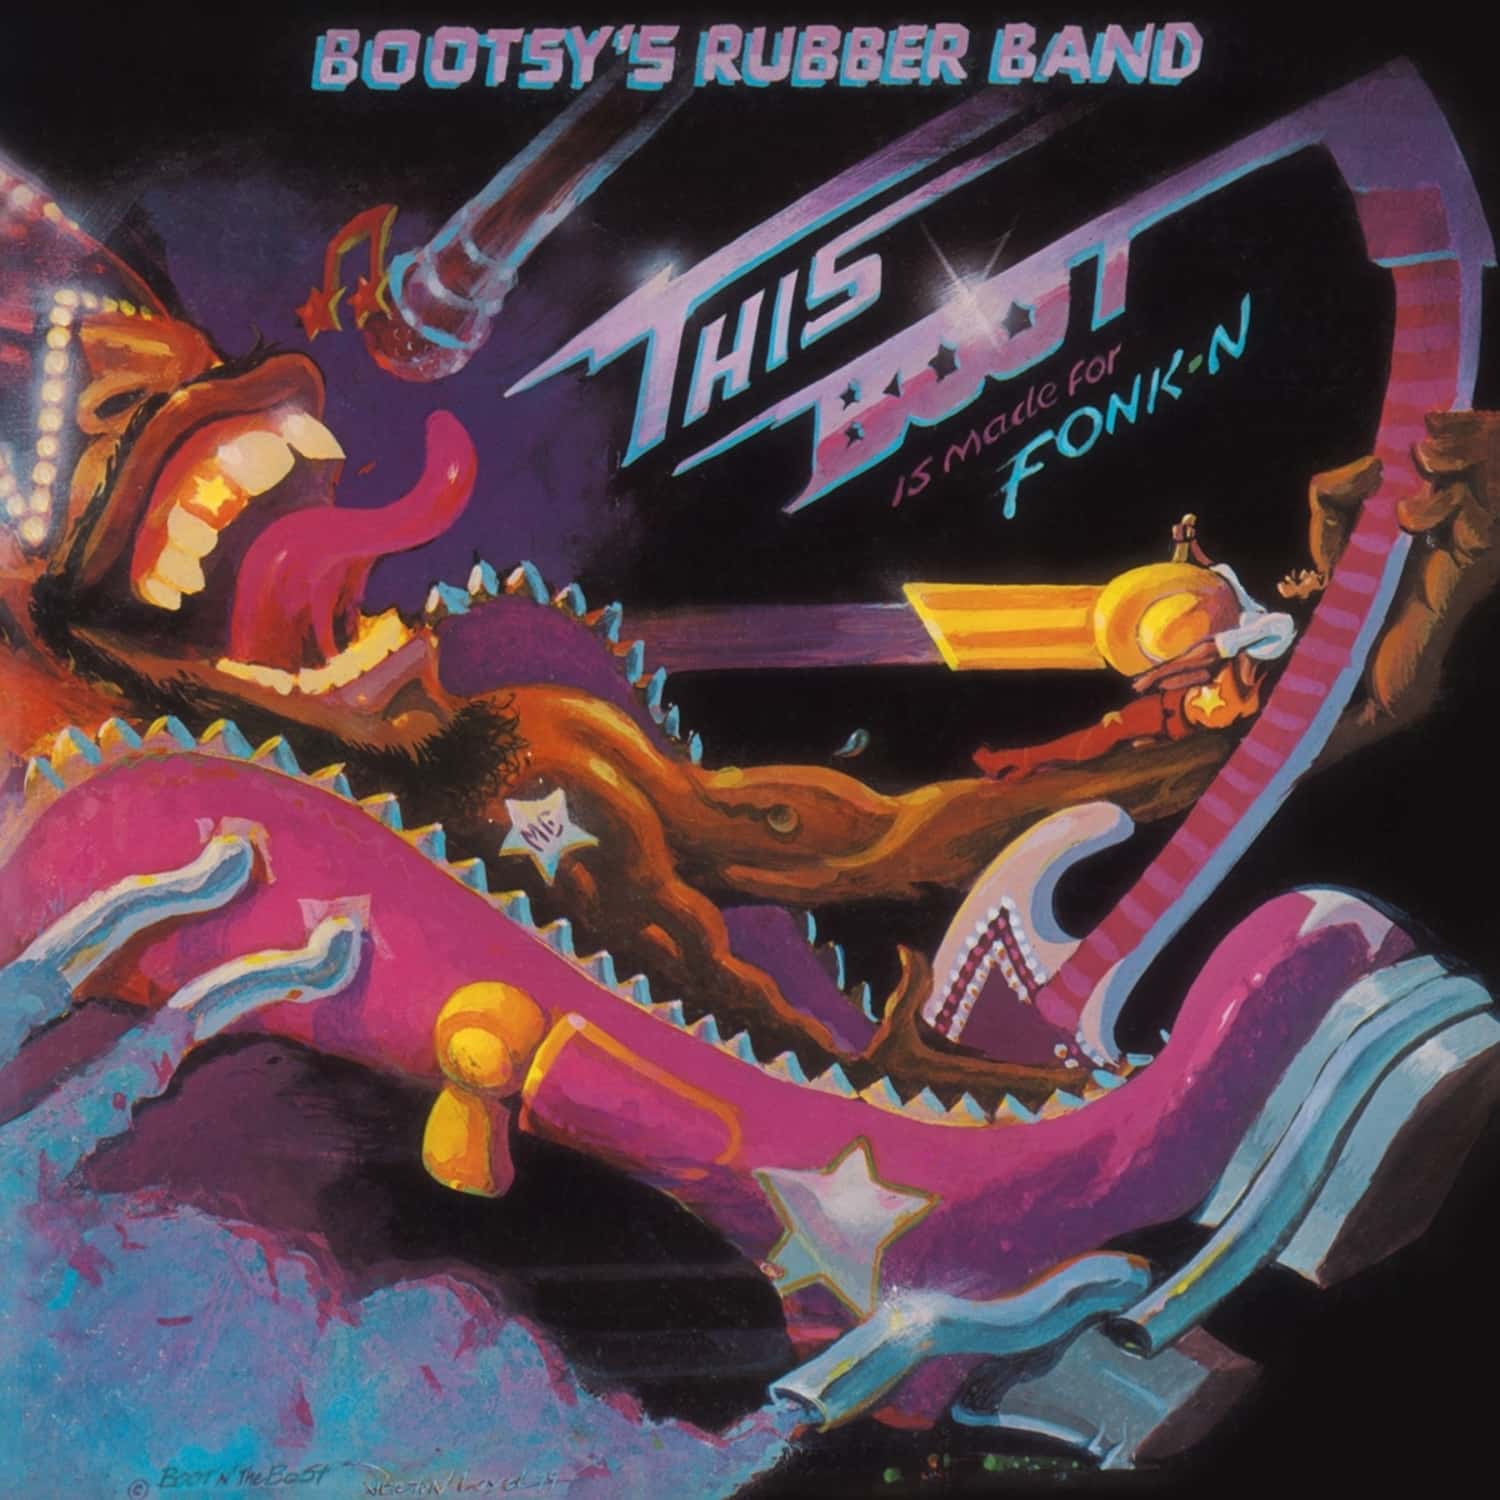 Bootsy s Rubber Band - THIS BOOT IS MADE FOR FONK-N 